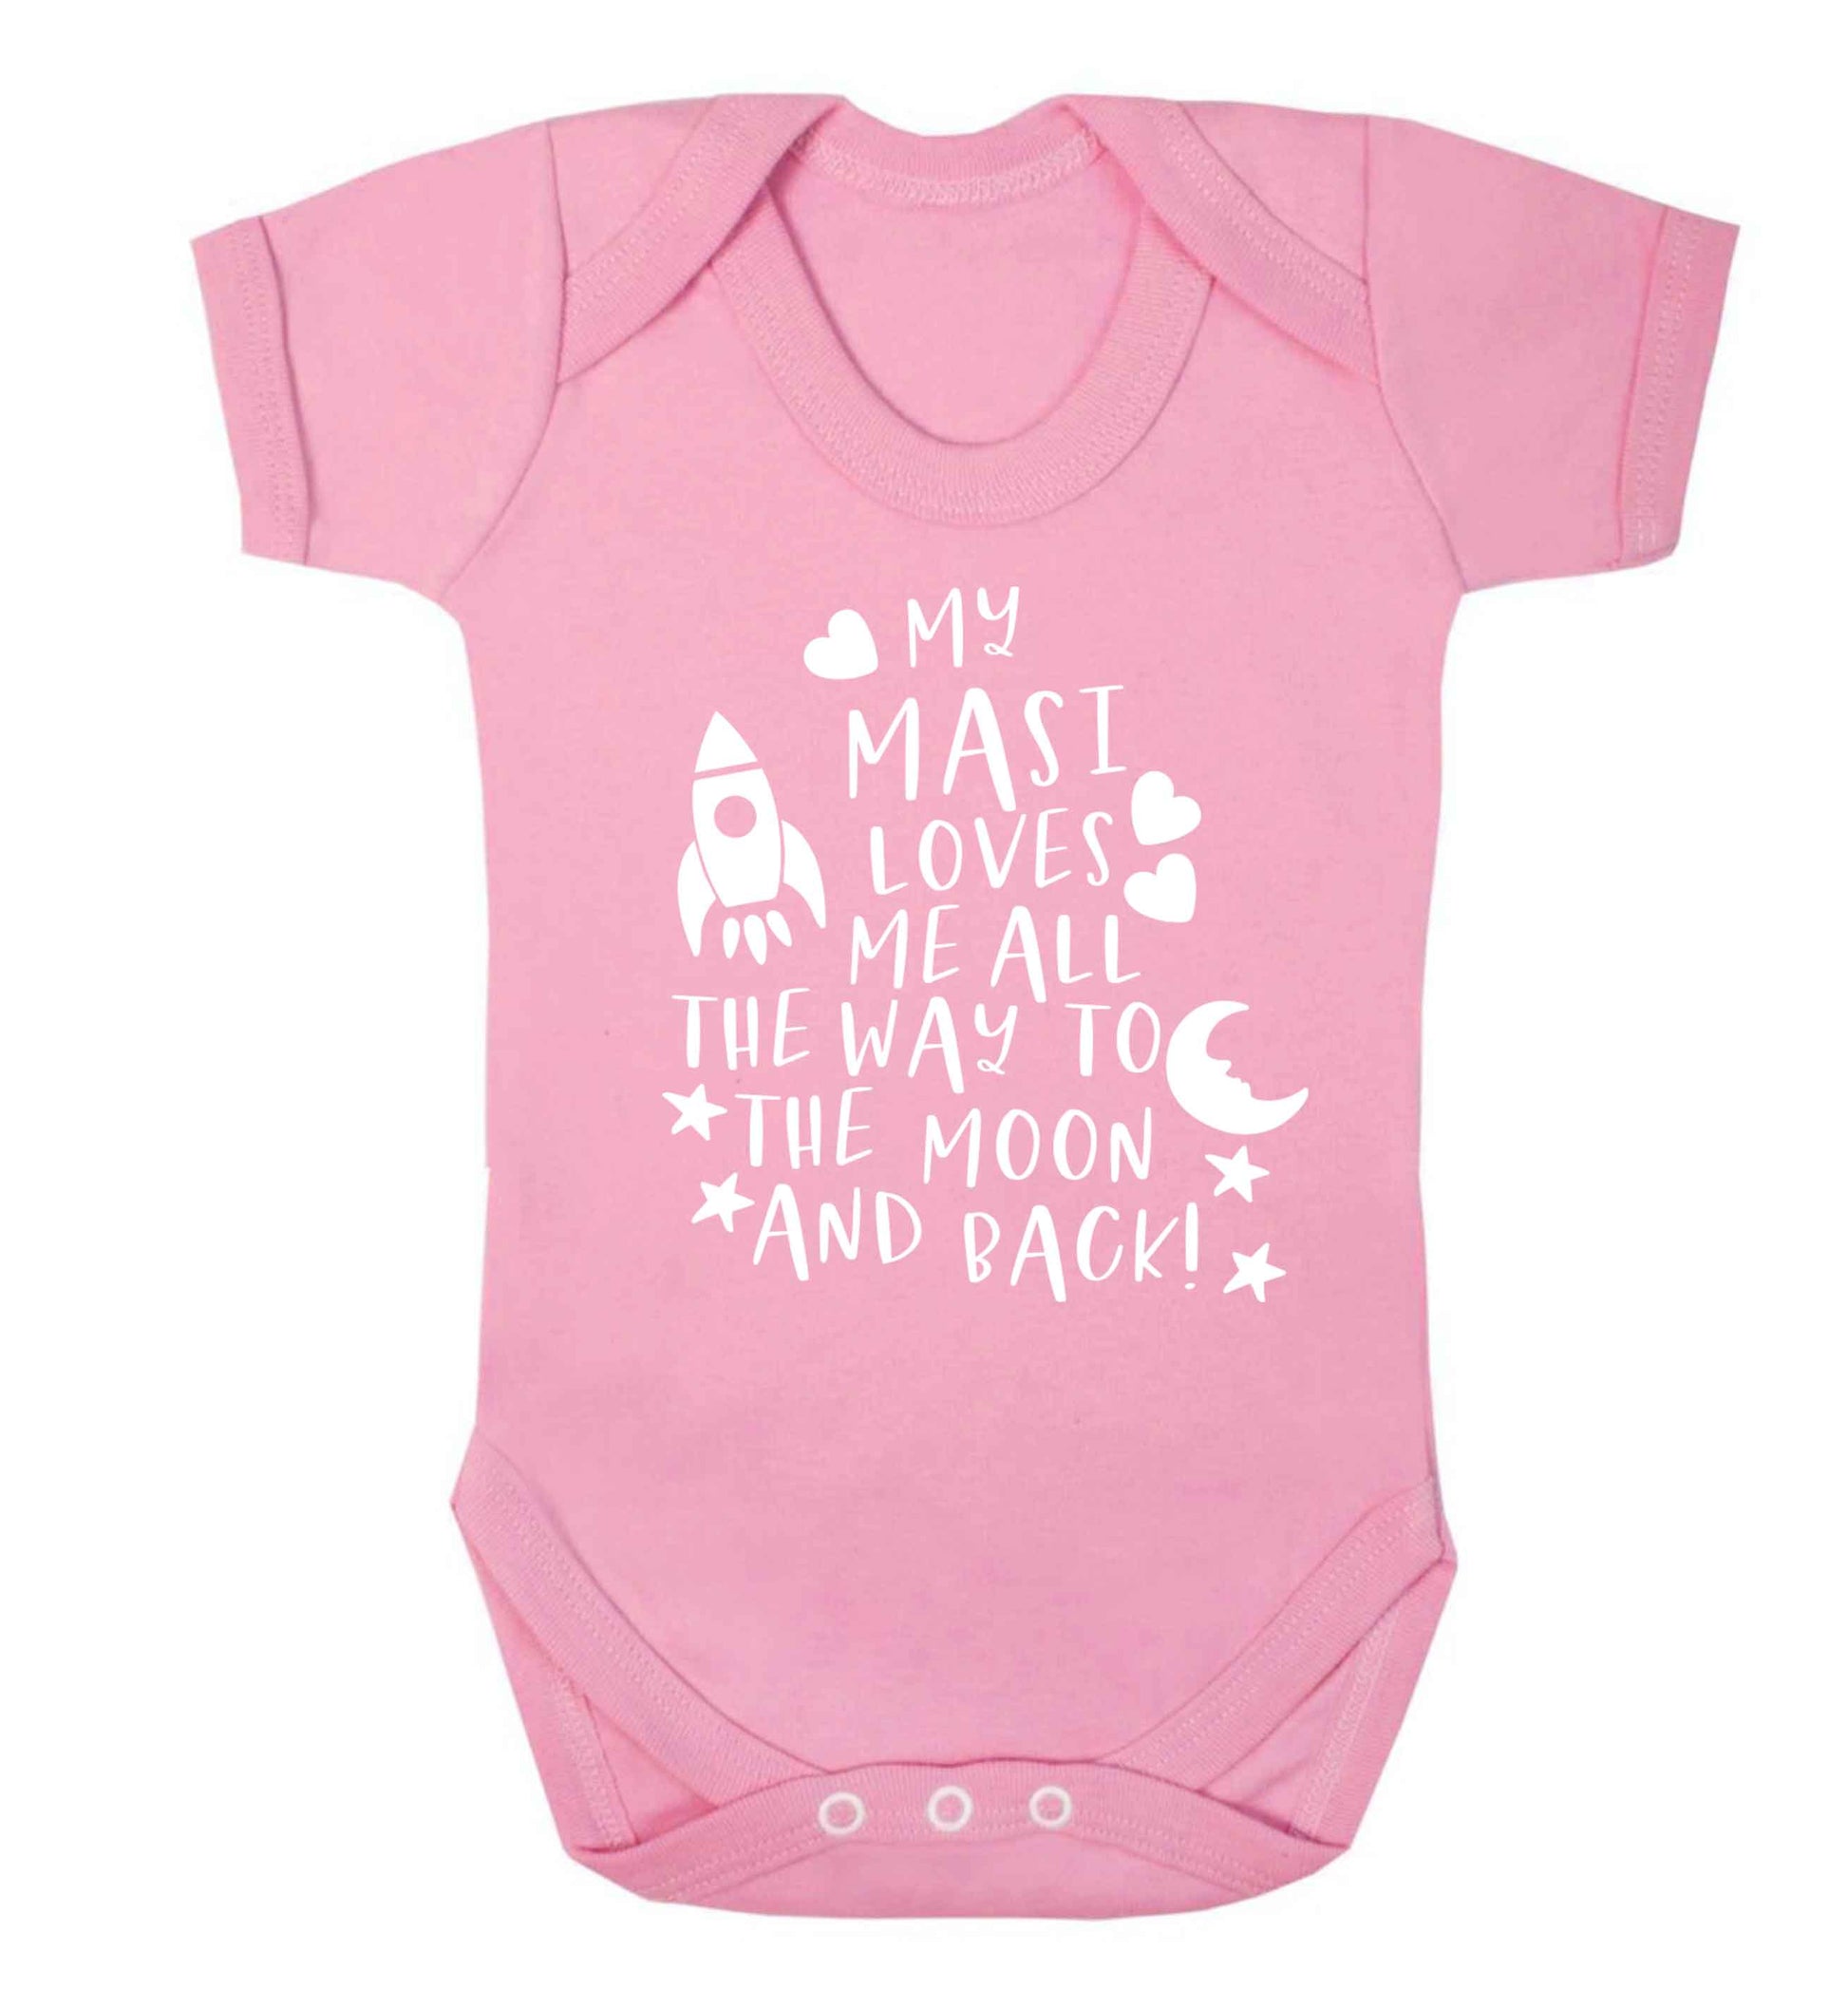 My masi loves me all the way to the moon and back Baby Vest pale pink 18-24 months